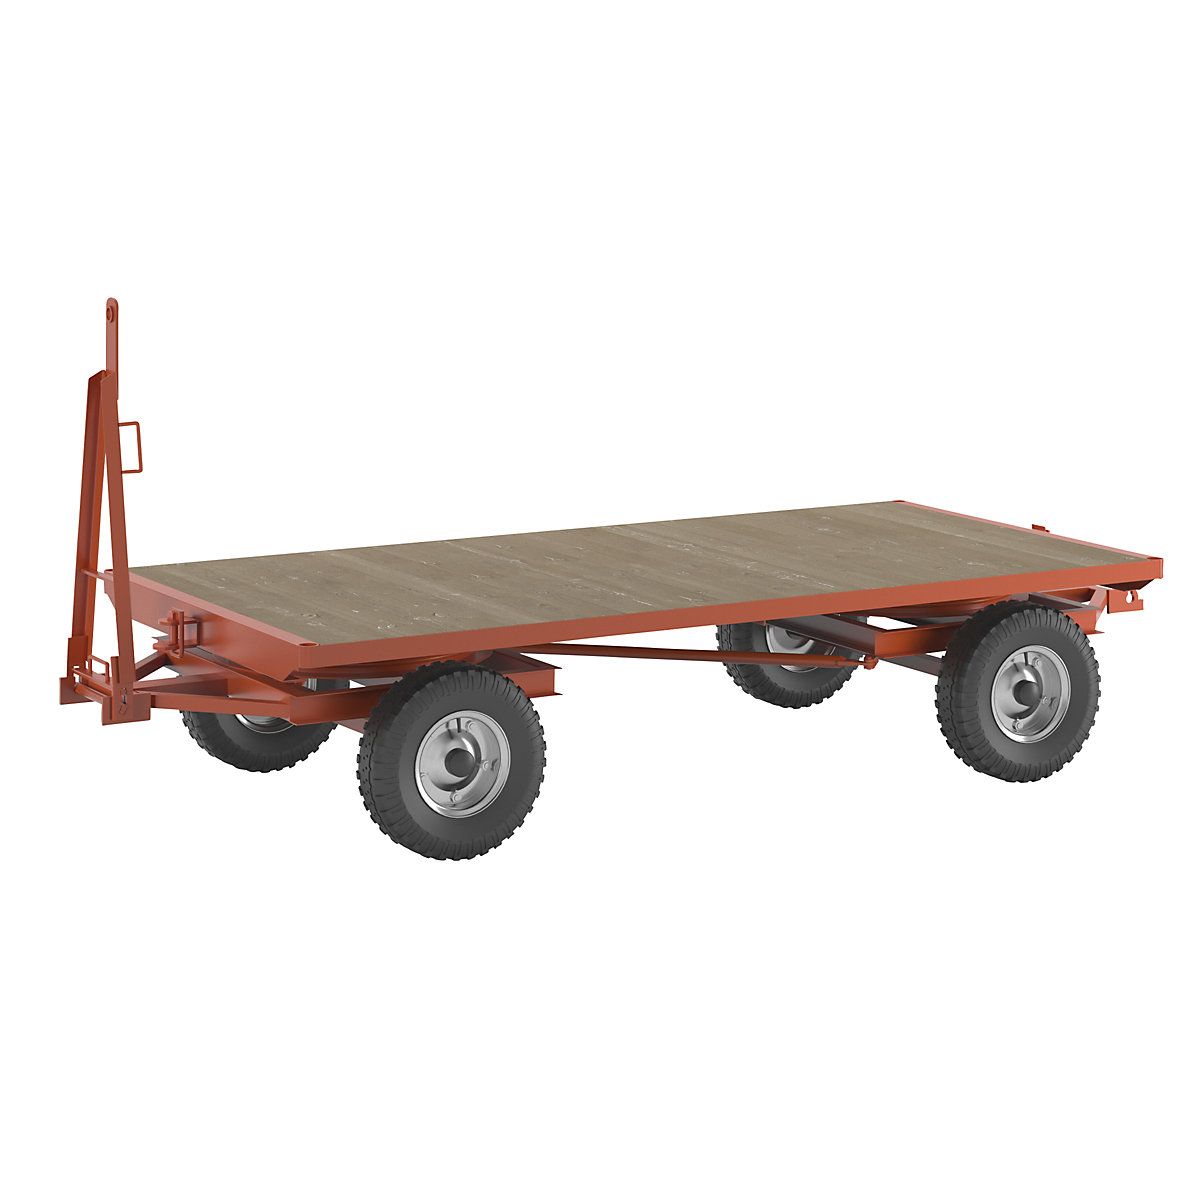 Trailer, 4-wheel double turntable steering, max. load 5 t, platform 3.0 x 1.5 m, pneumatic tyres-12